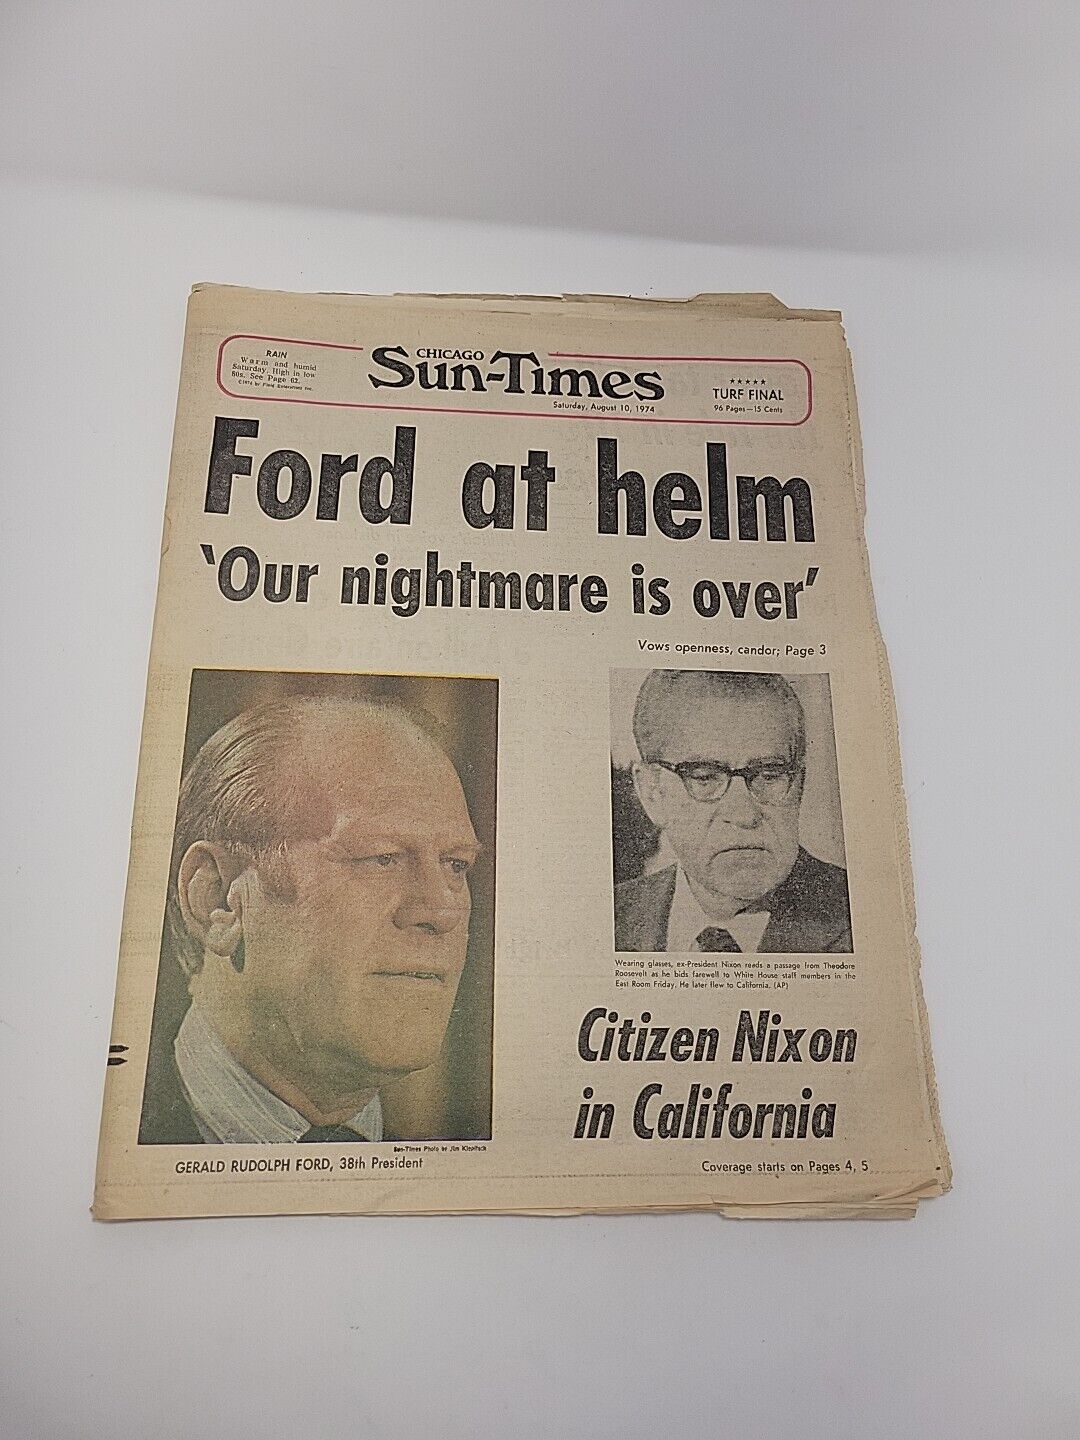 CHICAGO SUN-TIMES August 10, 1974 Ford At Helm \'Our Nightmare Is Over Headline